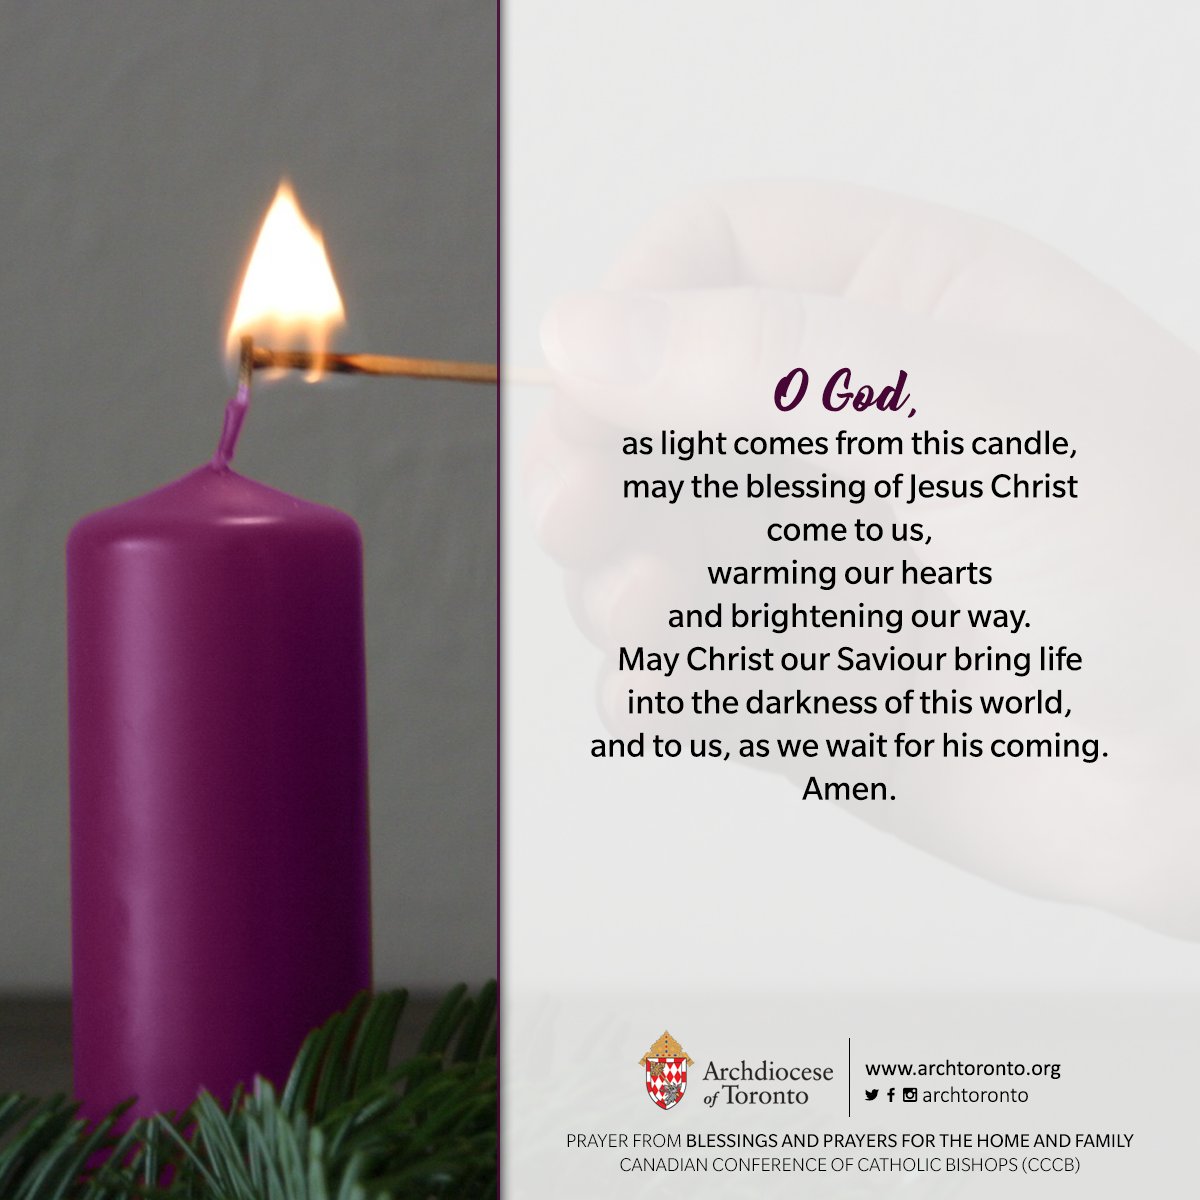 first sunday of advent candle